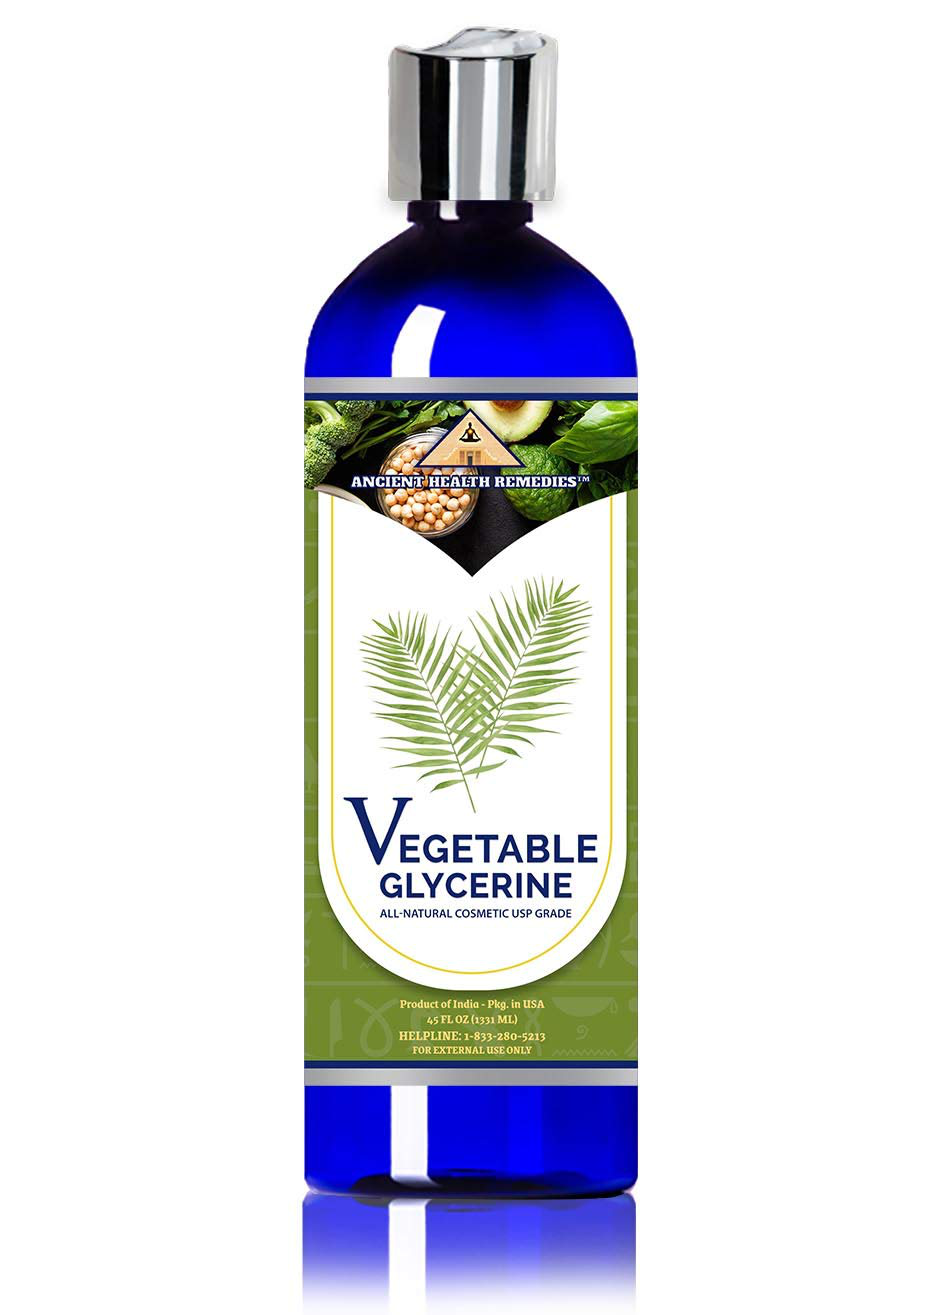 Unrefined Cold Pressed PURE Vegetable Glycerin Gel, Bulk Wholesale Beauty, Hair and Skin Moisturizing DIY Oil for Body Butter Skin Products & Hand Softening (INDIA) (20 OZ)